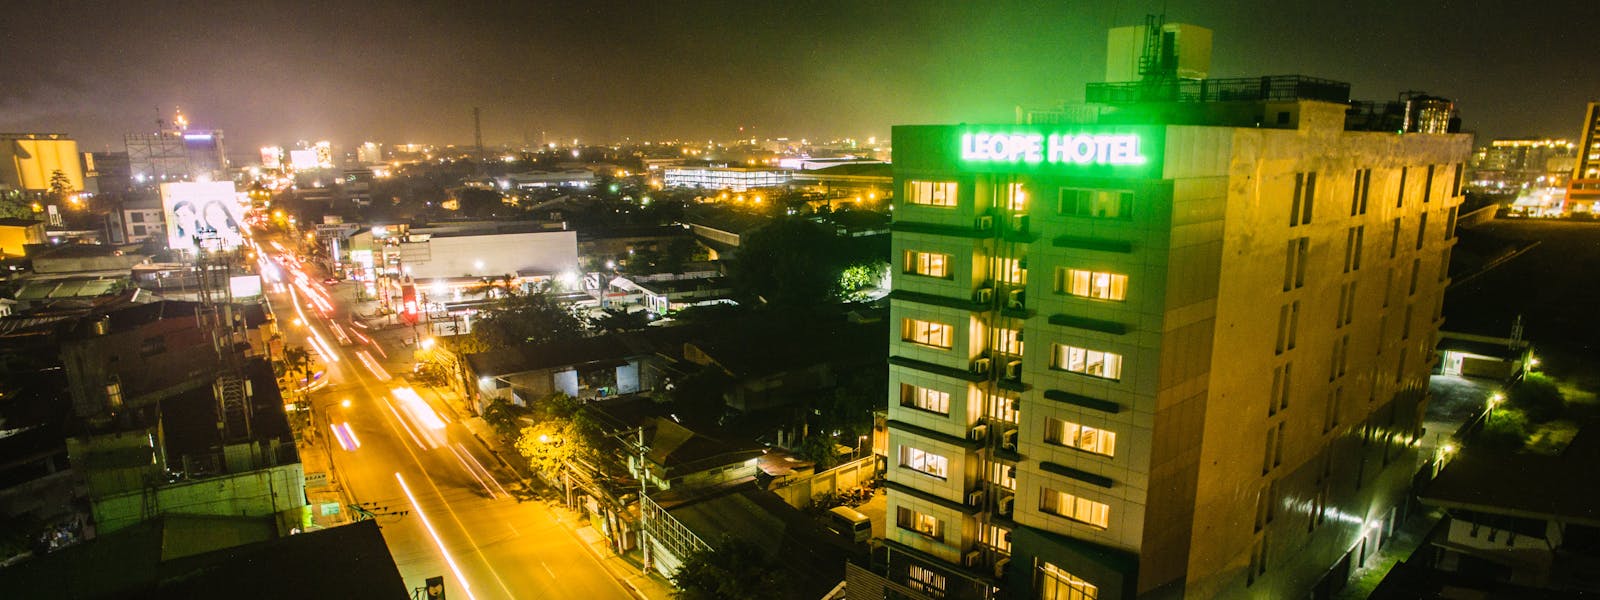 Leope Hotel, offering affordable prices.